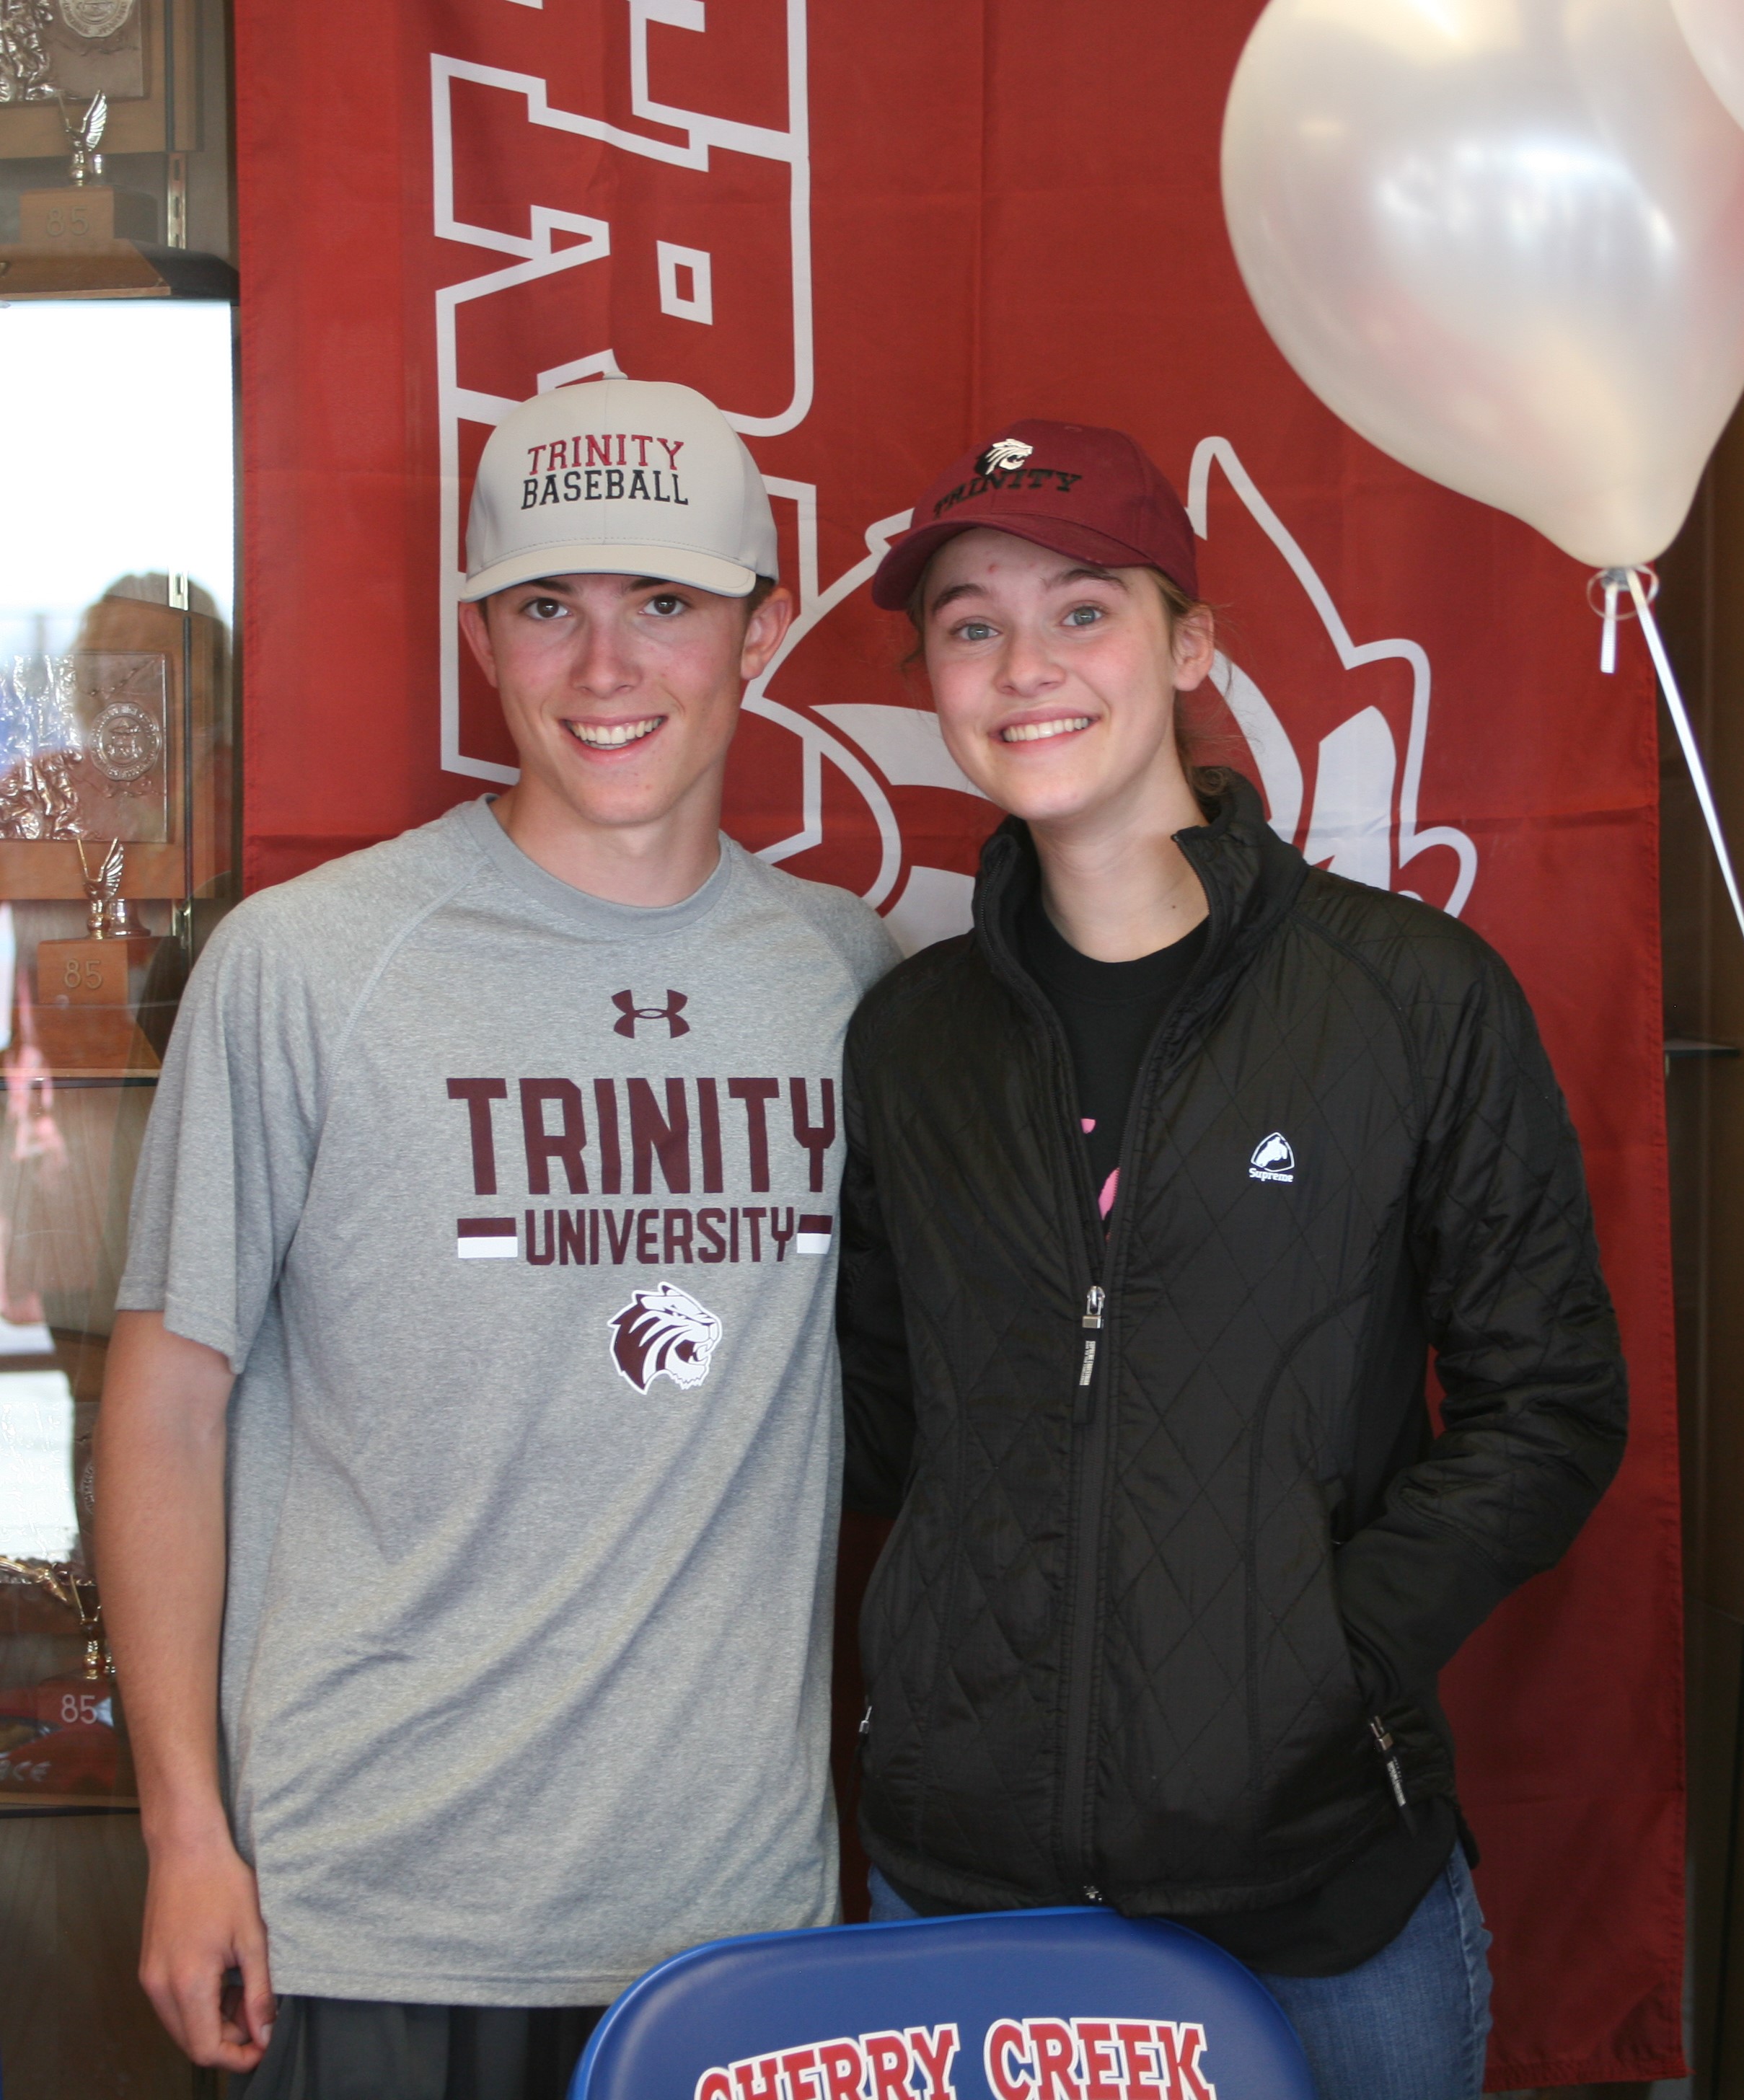 Jake Lawrence Athlete Interview – Committed to Trinity University